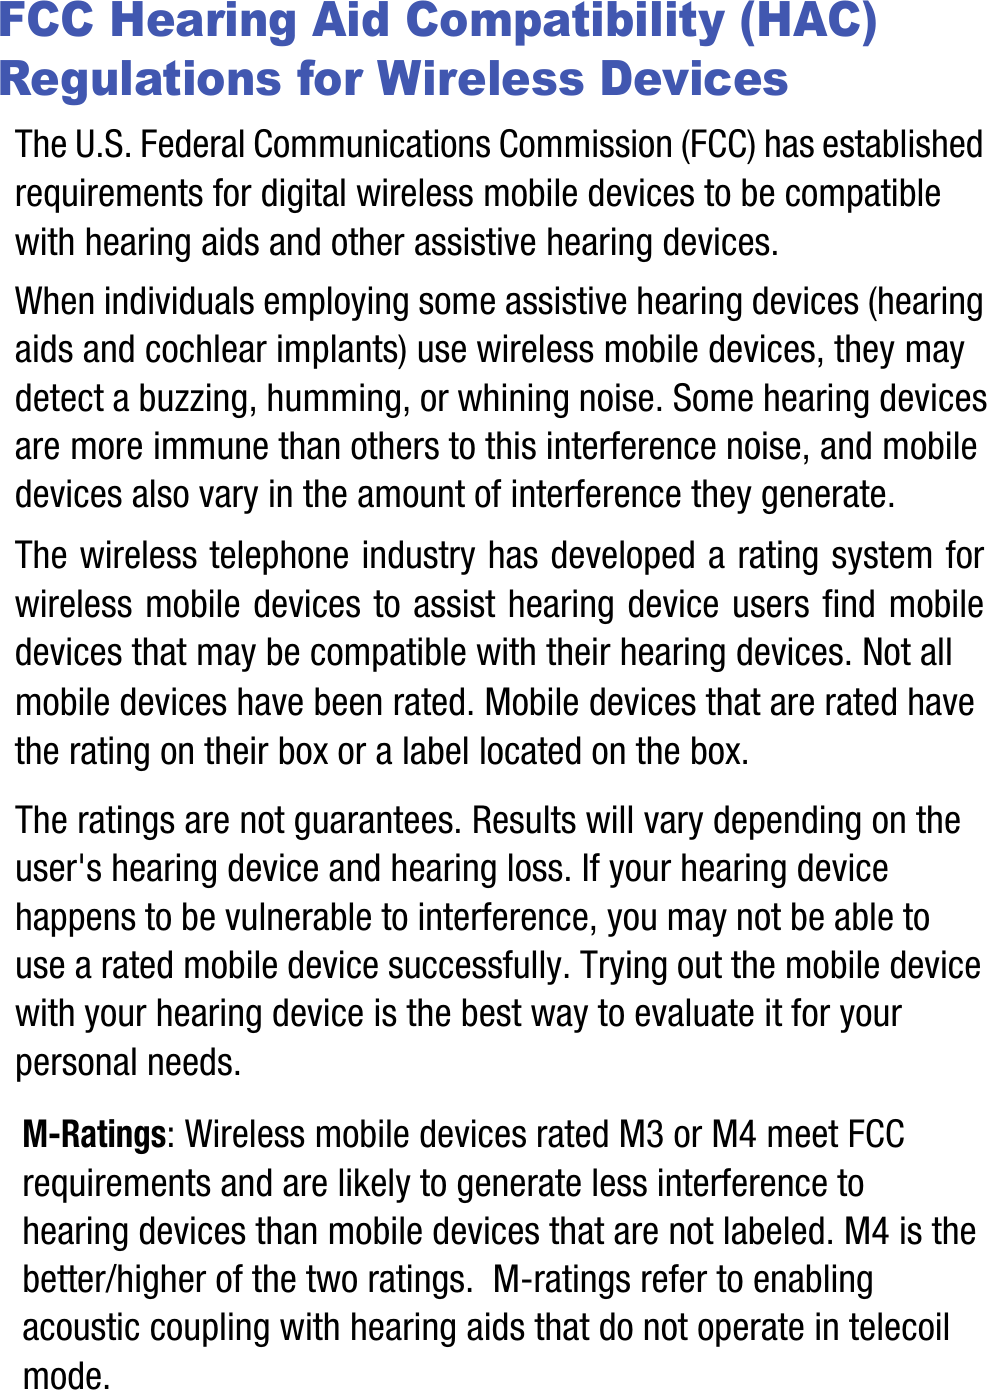 FCC Hearing Aid Compatibility (HAC) Regulations for Wireless DevicesThe U.S. Federal Communications Commission (FCC) has established requirements for digital wireless mobile devices to be compatible with hearing aids and other assistive hearing devices.When individuals employing some assistive hearing devices (hearing aids and cochlear implants) use wireless mobile devices, they may detect a buzzing, humming, or whining noise. Some hearing devices are more immune than others to this interference noise, and mobile devices also vary in the amount of interference they generate.The wireless telephone industry has developed a rating system for wireless mobile devices to assist hearing device users find mobile devices that may be compatible with their hearing devices. Not all mobile devices have been rated. Mobile devices that are rated have the rating on their box or a label located on the box.The ratings are not guarantees. Results will vary depending on the user&apos;s hearing device and hearing loss. If your hearing device happens to be vulnerable to interference, you may not be able to use a rated mobile device successfully. Trying out the mobile device with your hearing device is the best way to evaluate it for your personal needs.M-Ratings: Wireless mobile devices rated M3 or M4 meet FCC requirements and are likely to generate less interference to hearing devices than mobile devices that are not labeled. M4 is the better/higher of the two ratings.  M-ratings refer to enabling acoustic coupling with hearing aids that do not operate in telecoil mode.